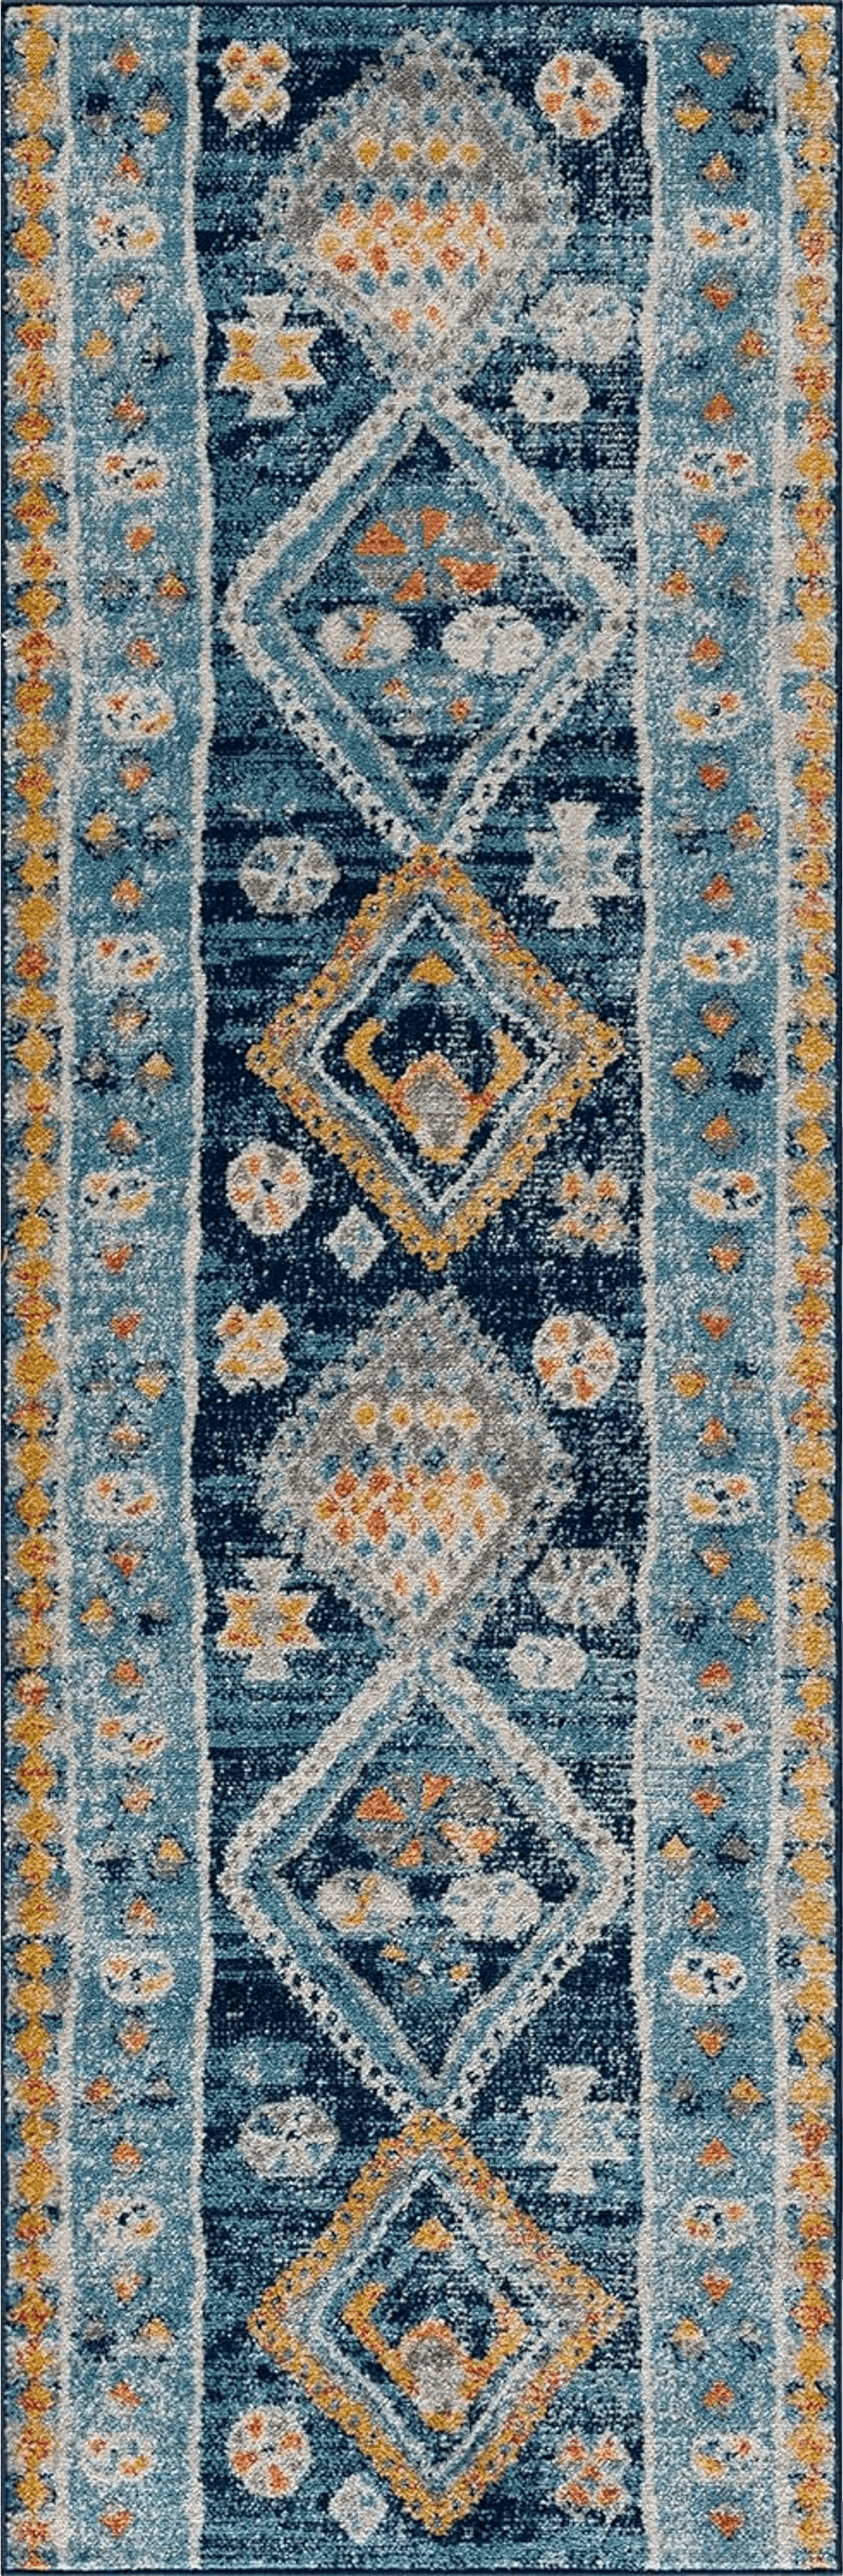 Caria Bloom Rugs Tribal Geometric Blue Multicolor Runner - Boho 6 ft Runner for Entryways and Hallways (2'7" x 6')